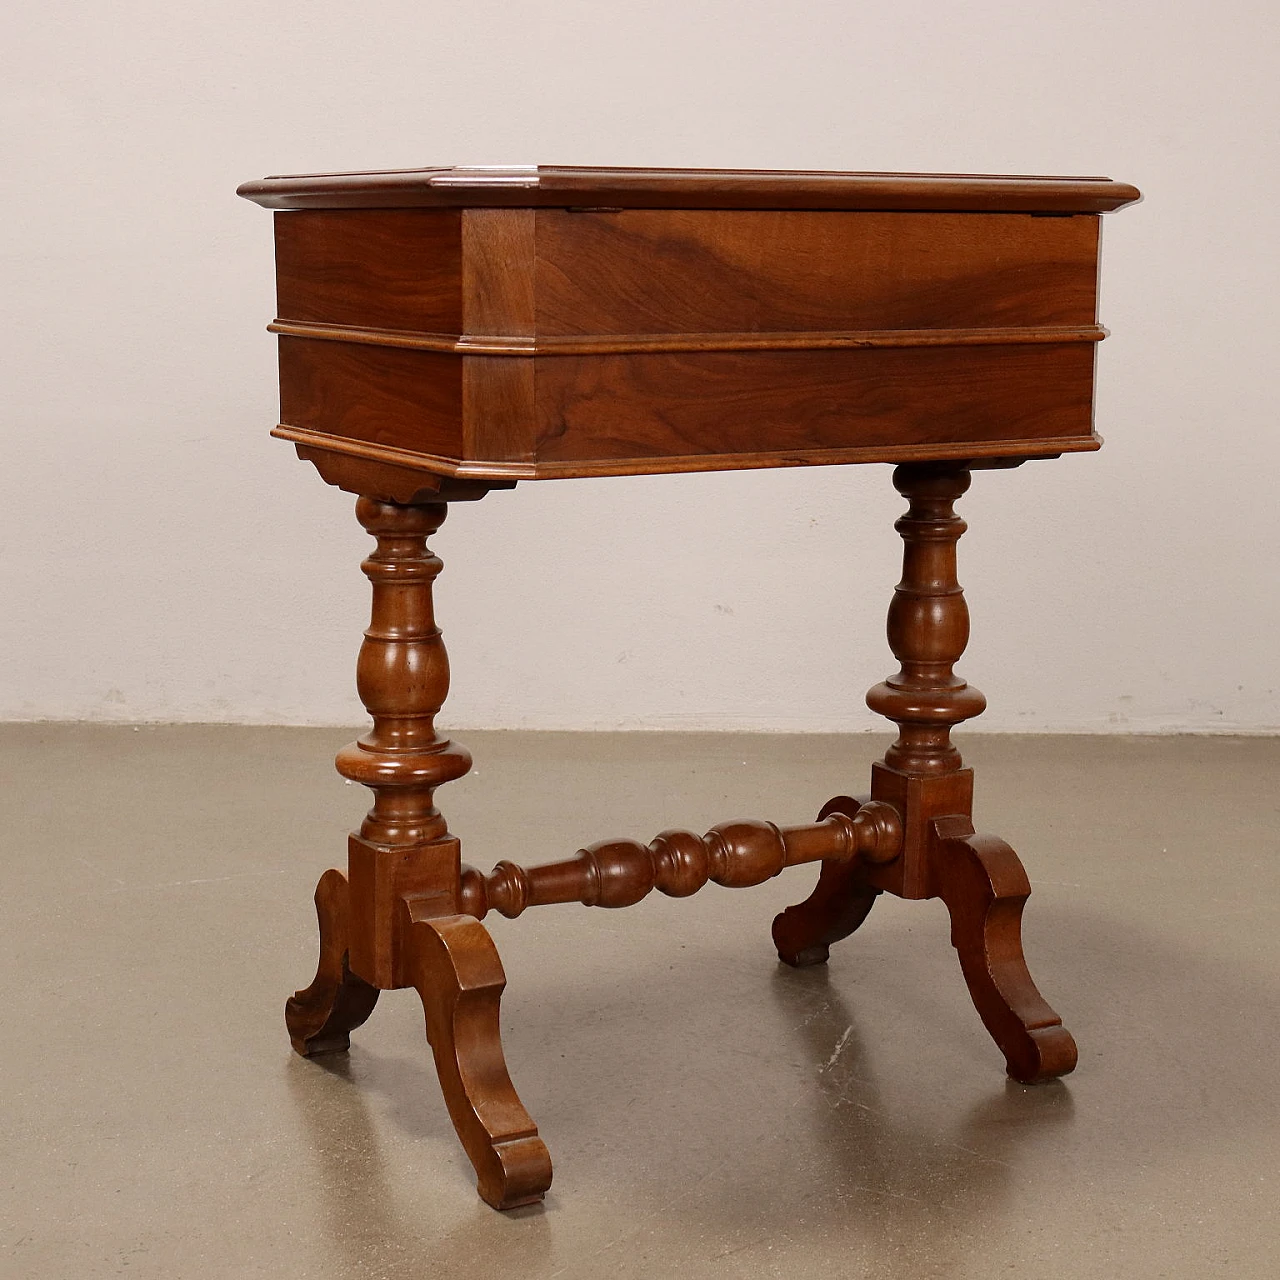 Walnut and cherry wood side table with drawers, 19th century 7